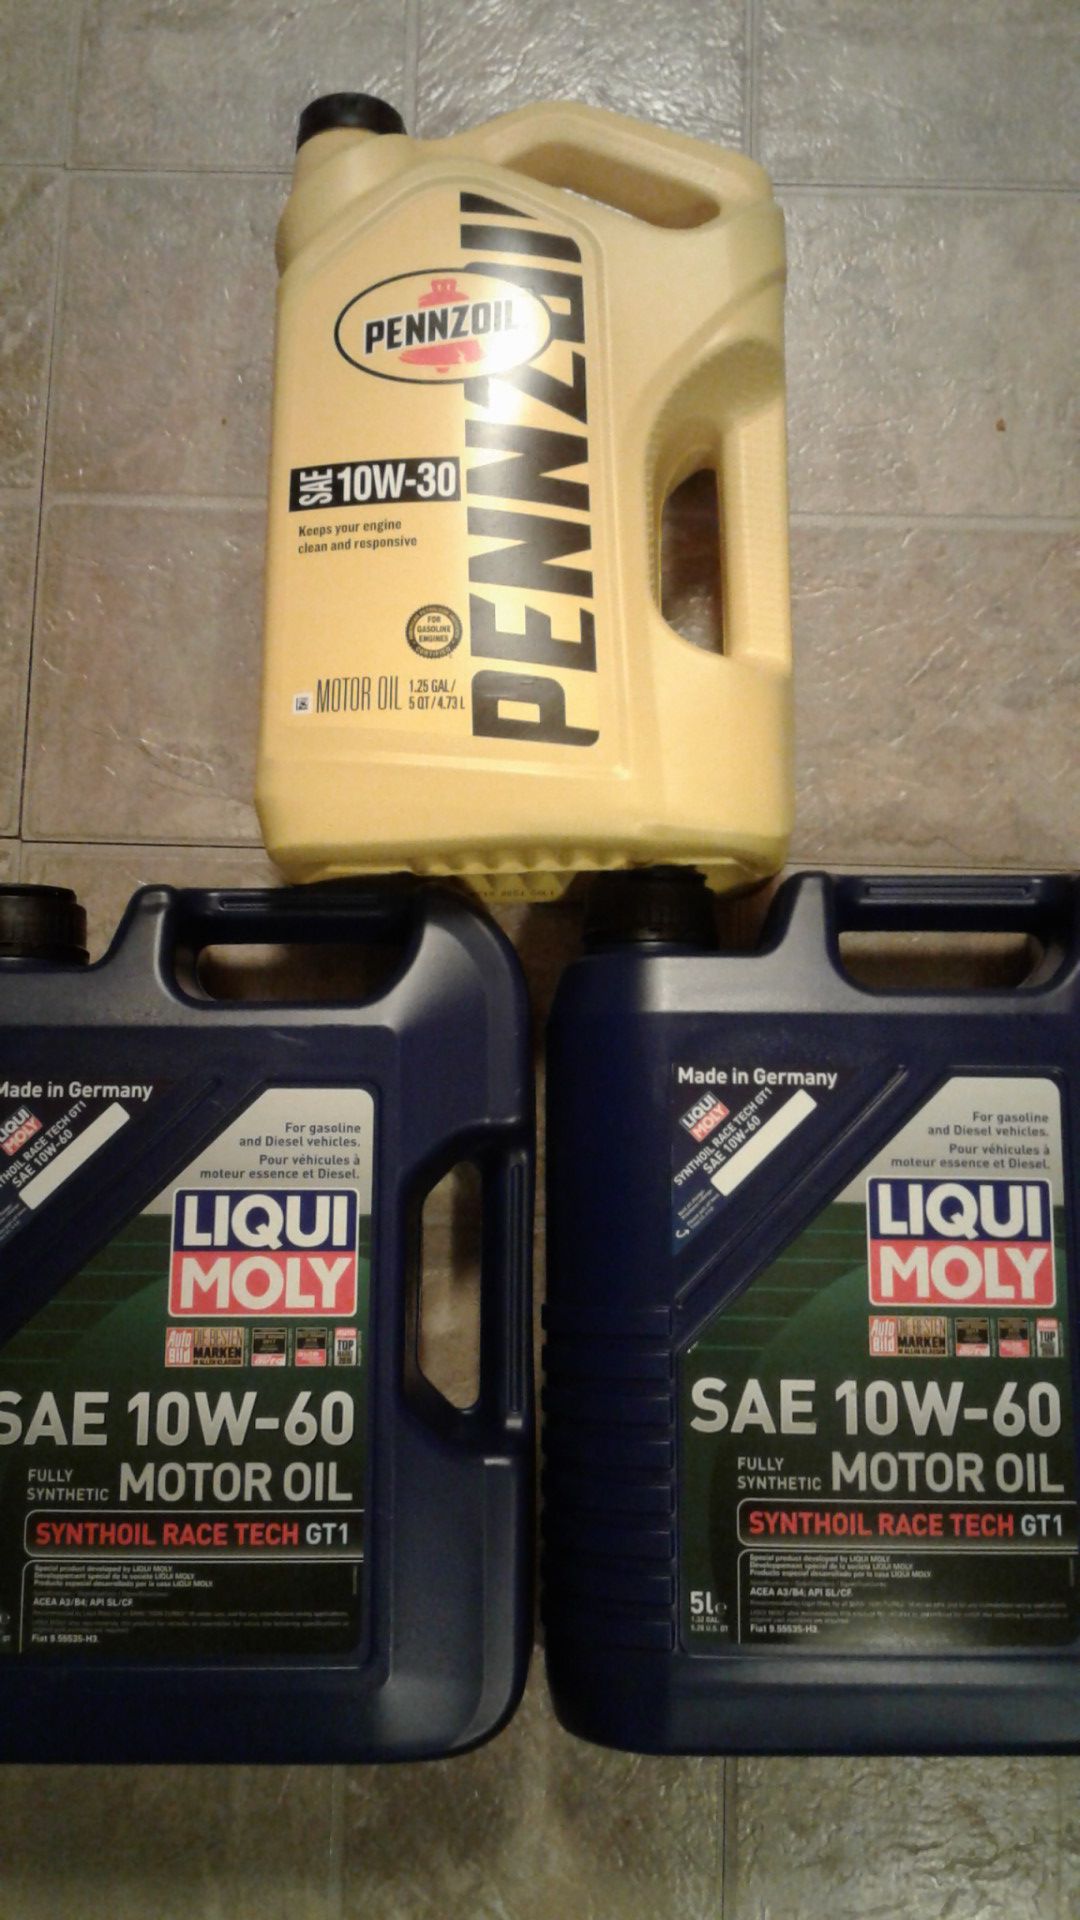 Pennzoil - SAE 10W-30 / Liqui Molly - SAE 10W-60 Fully Synthetic Motor Oil Synthoil Race Tech GT1